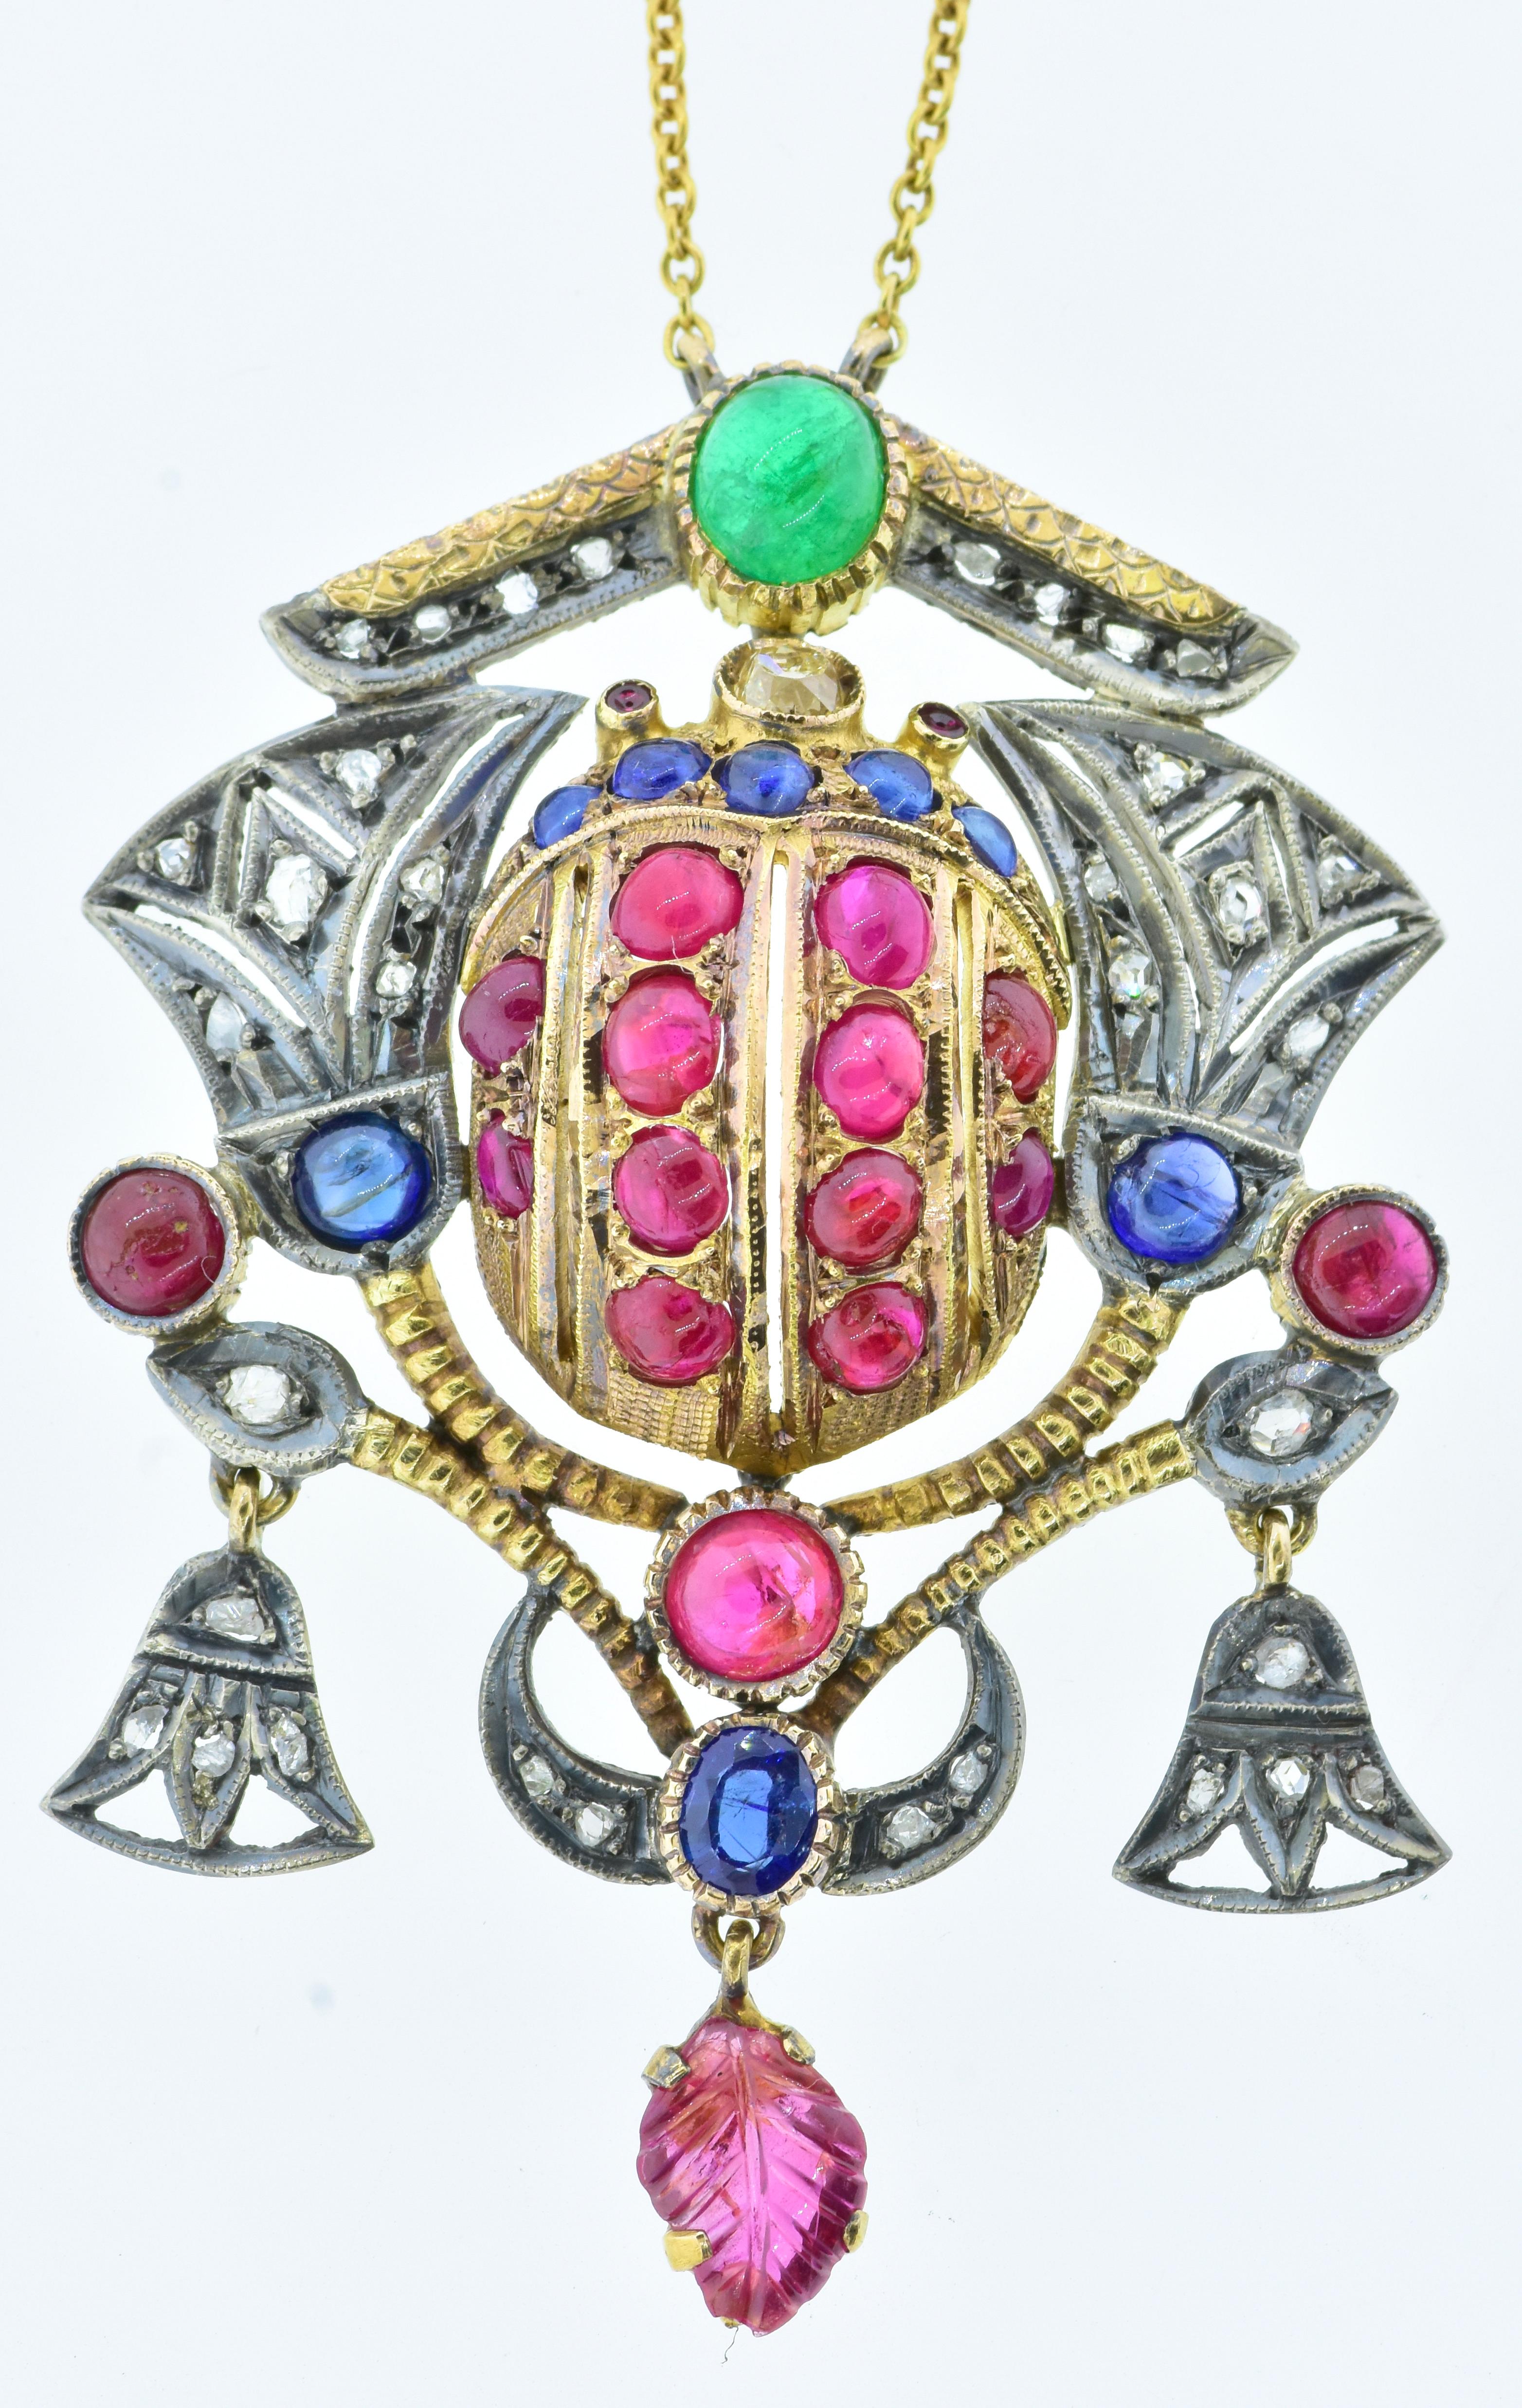 Art Deco Egyptian Revival Necklace with Diamonds, Rubies, Sapphires and Emerald, c. 1920